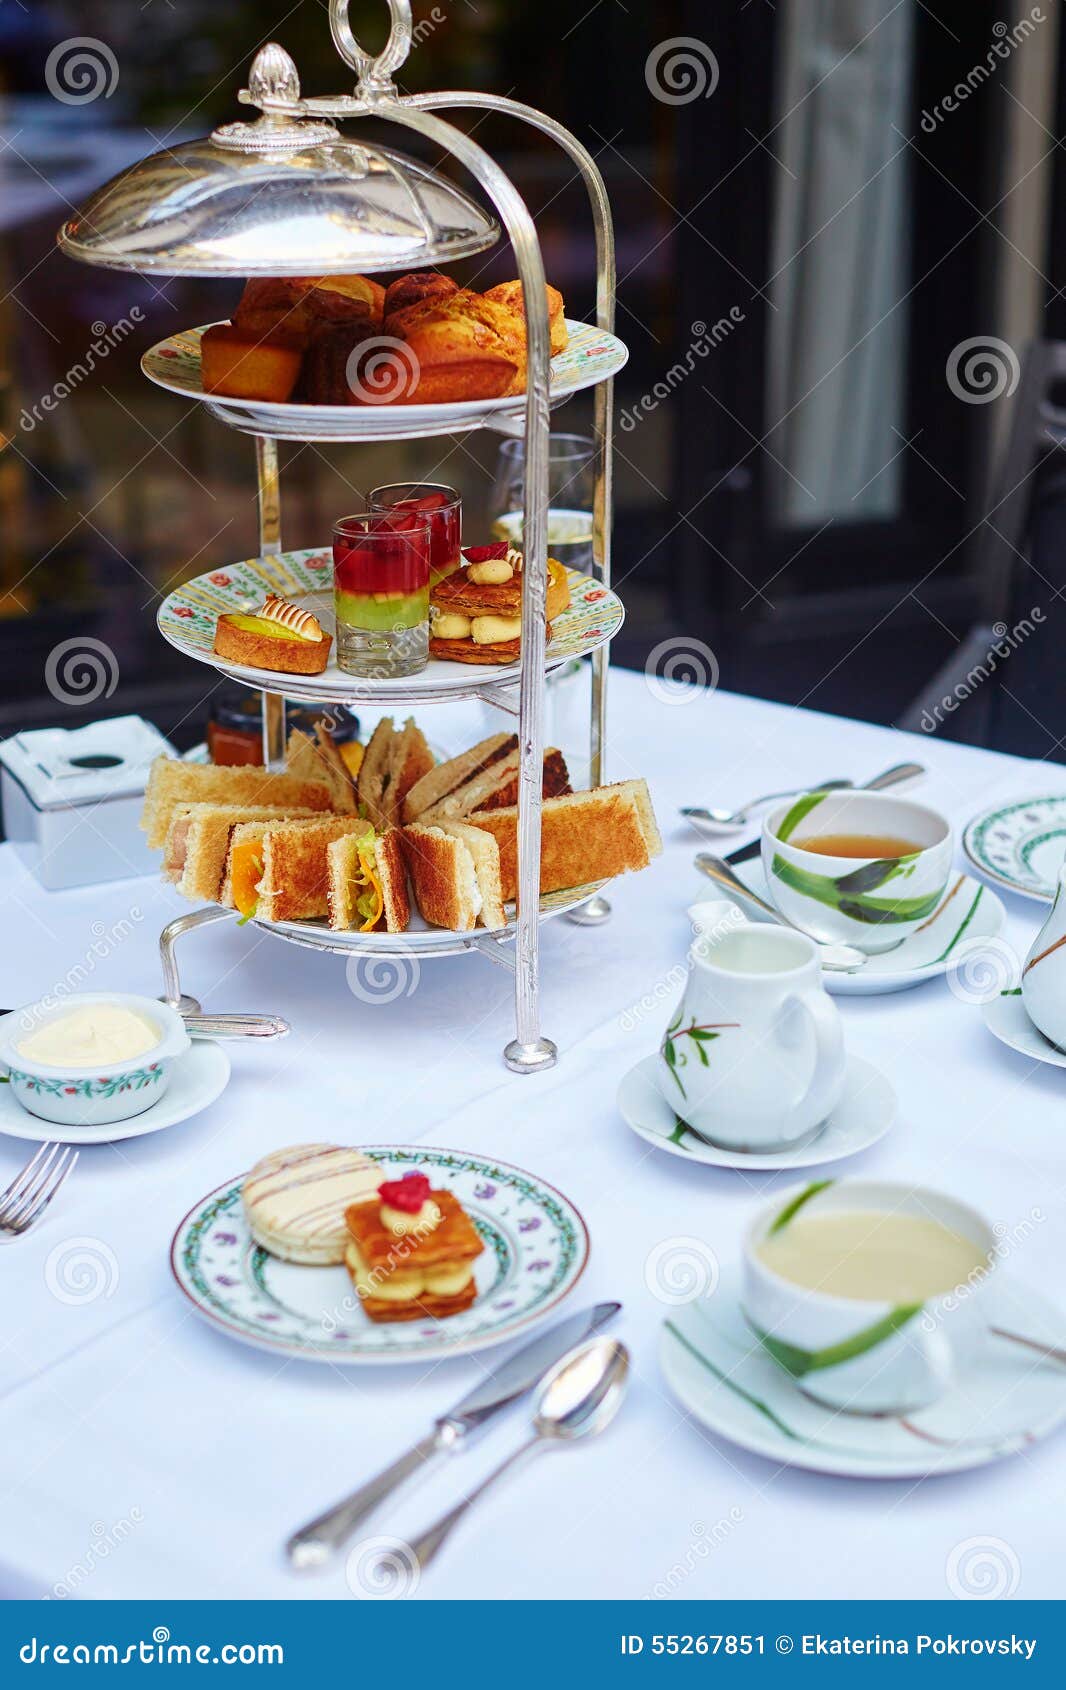 Beautiful Table Setting For High Tea Ceremony Stock Image Image Of Beautiful